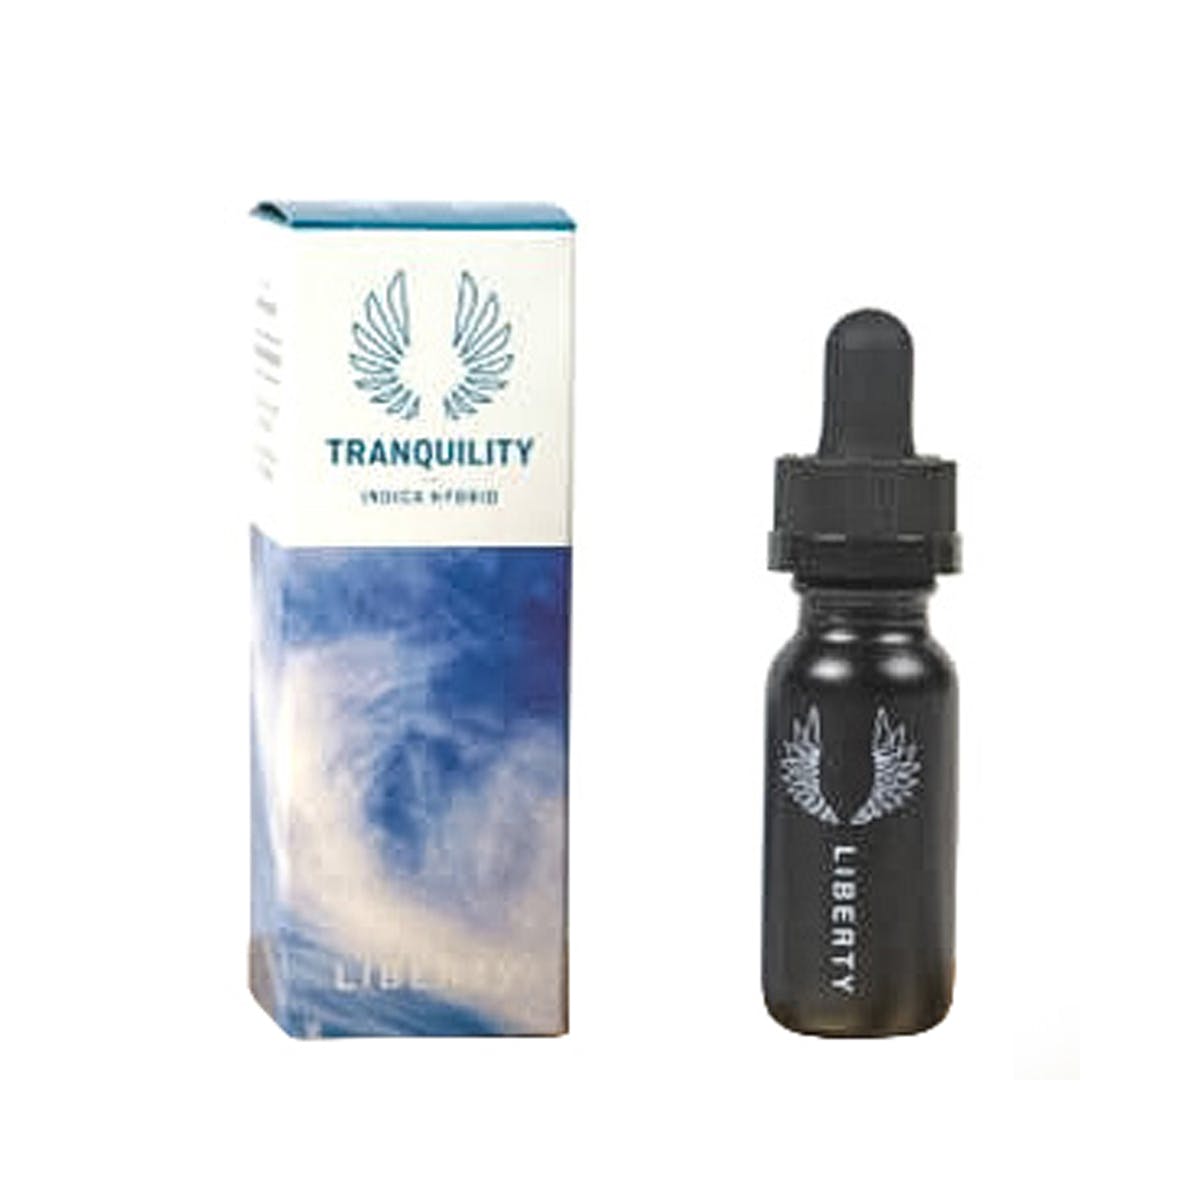 Tranquility Tincture